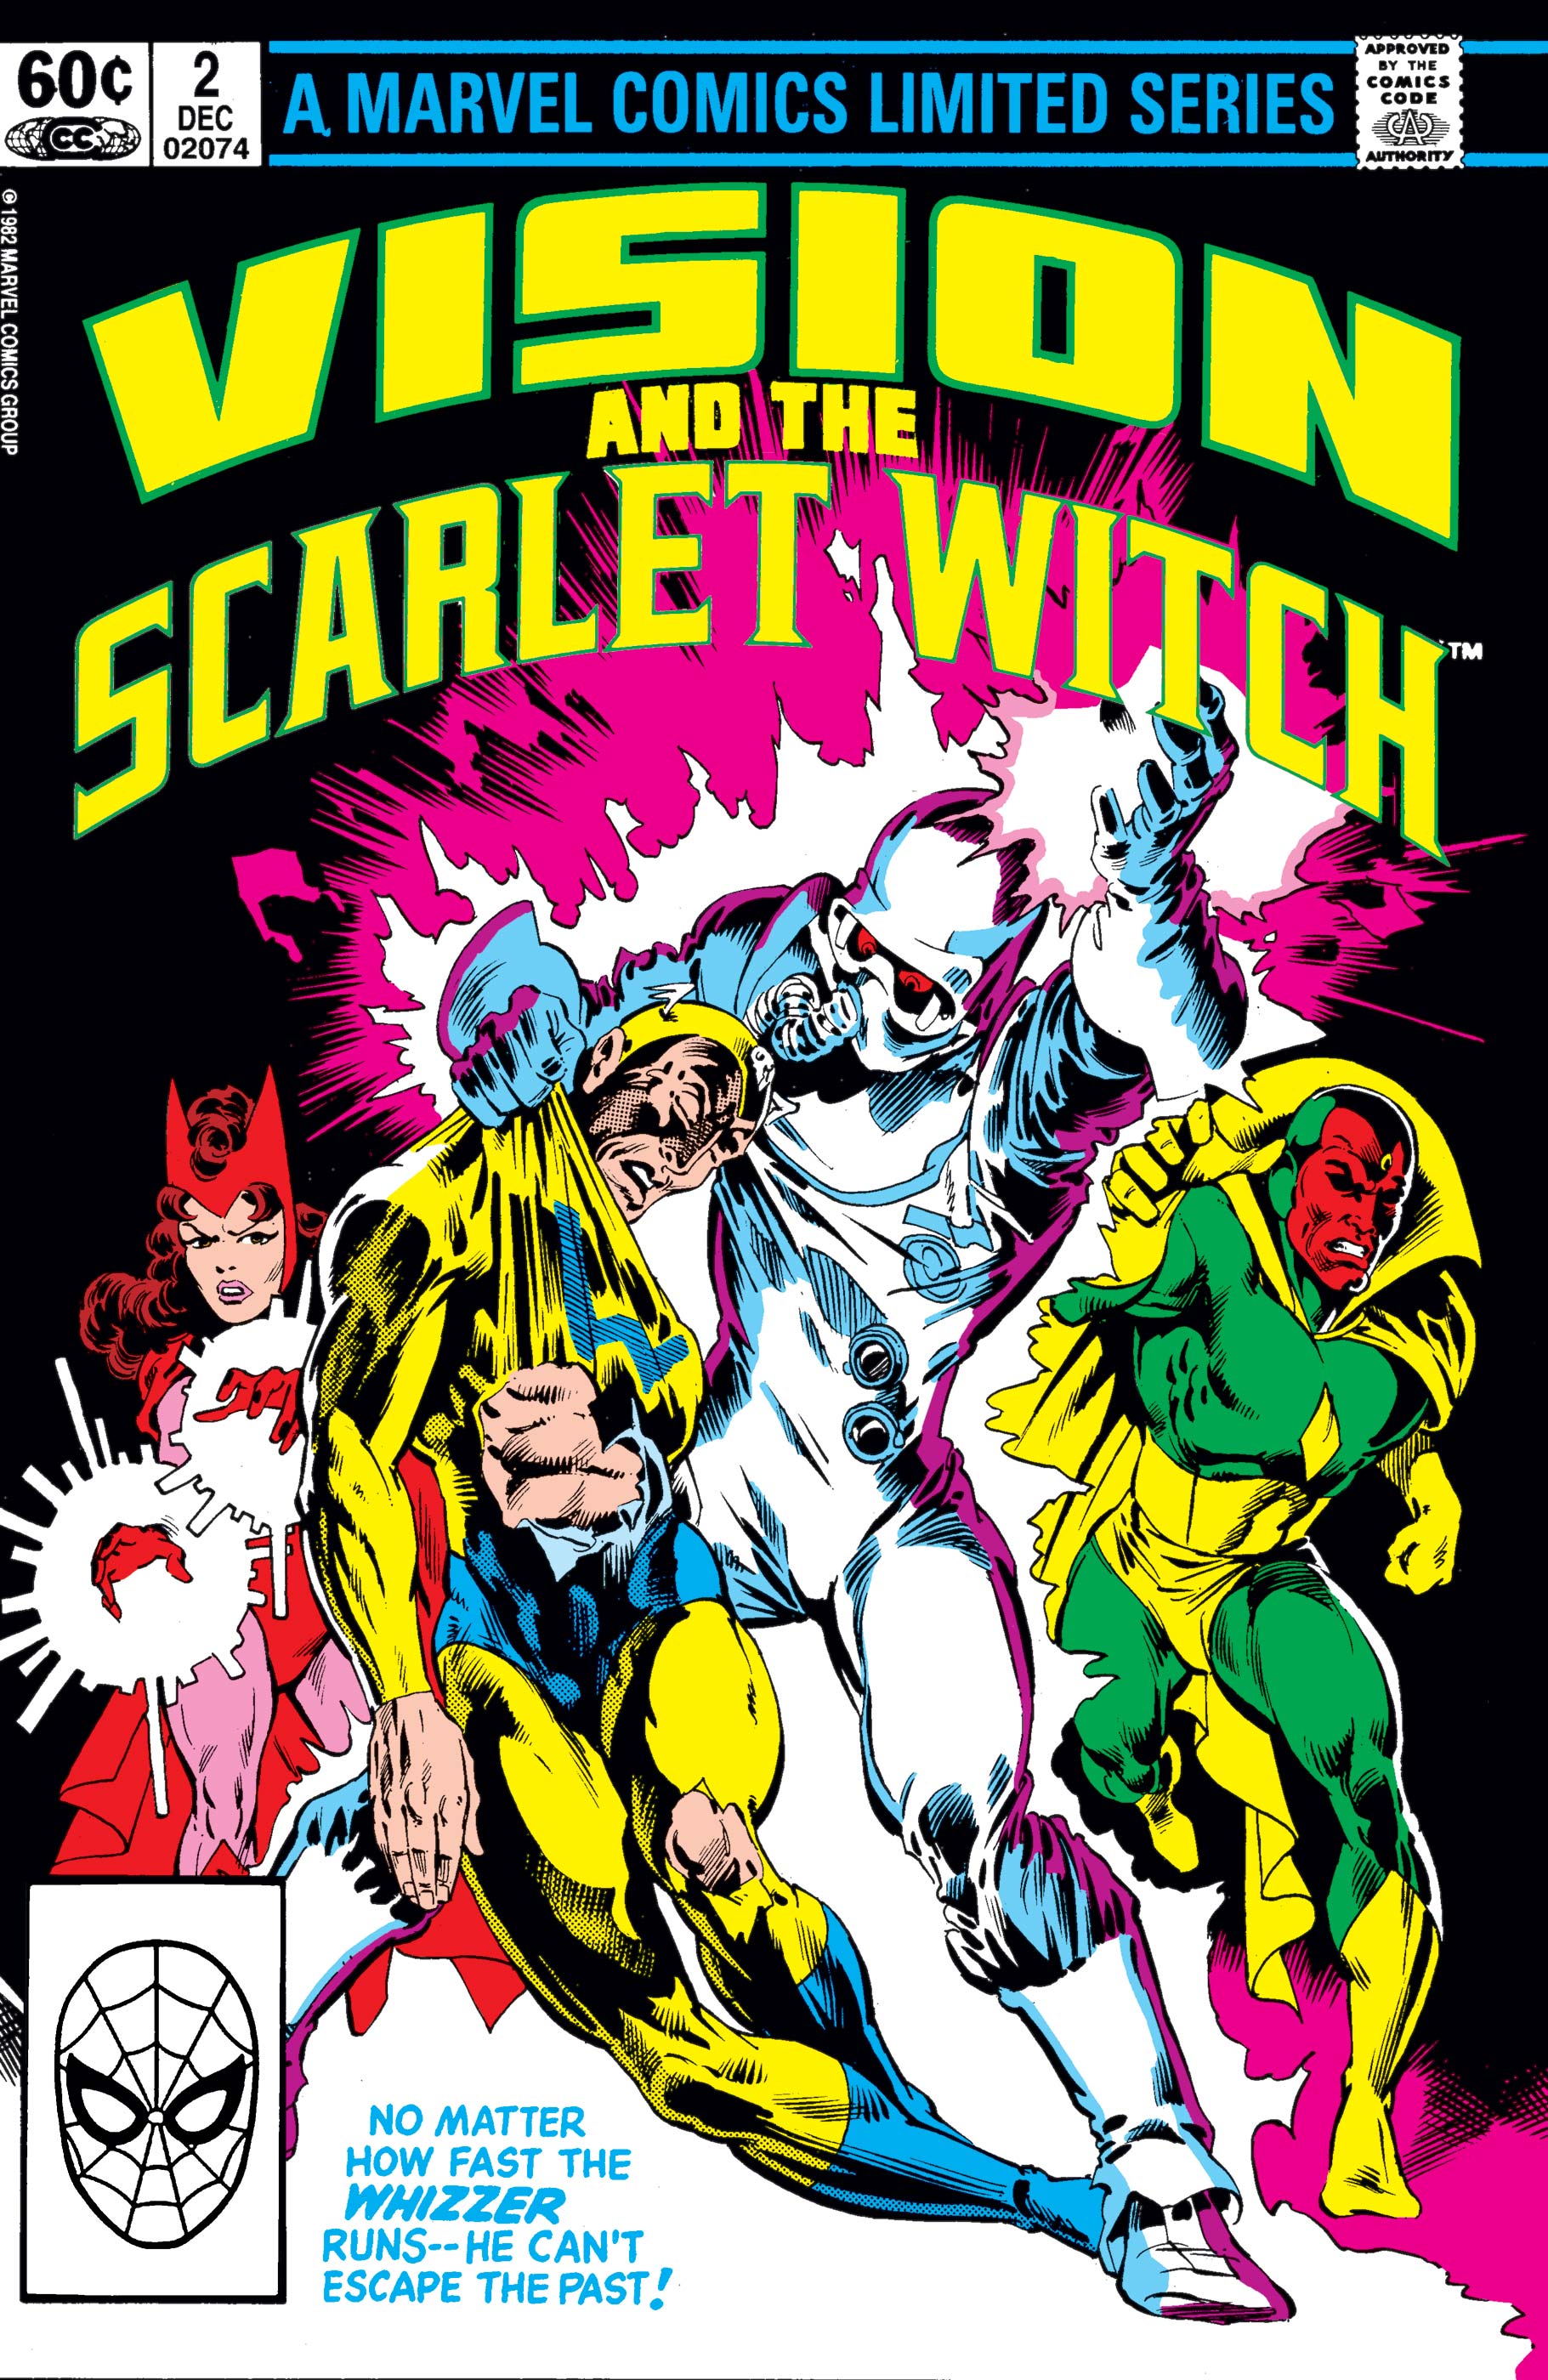 Vision and the Scarlet Witch (1982) #2